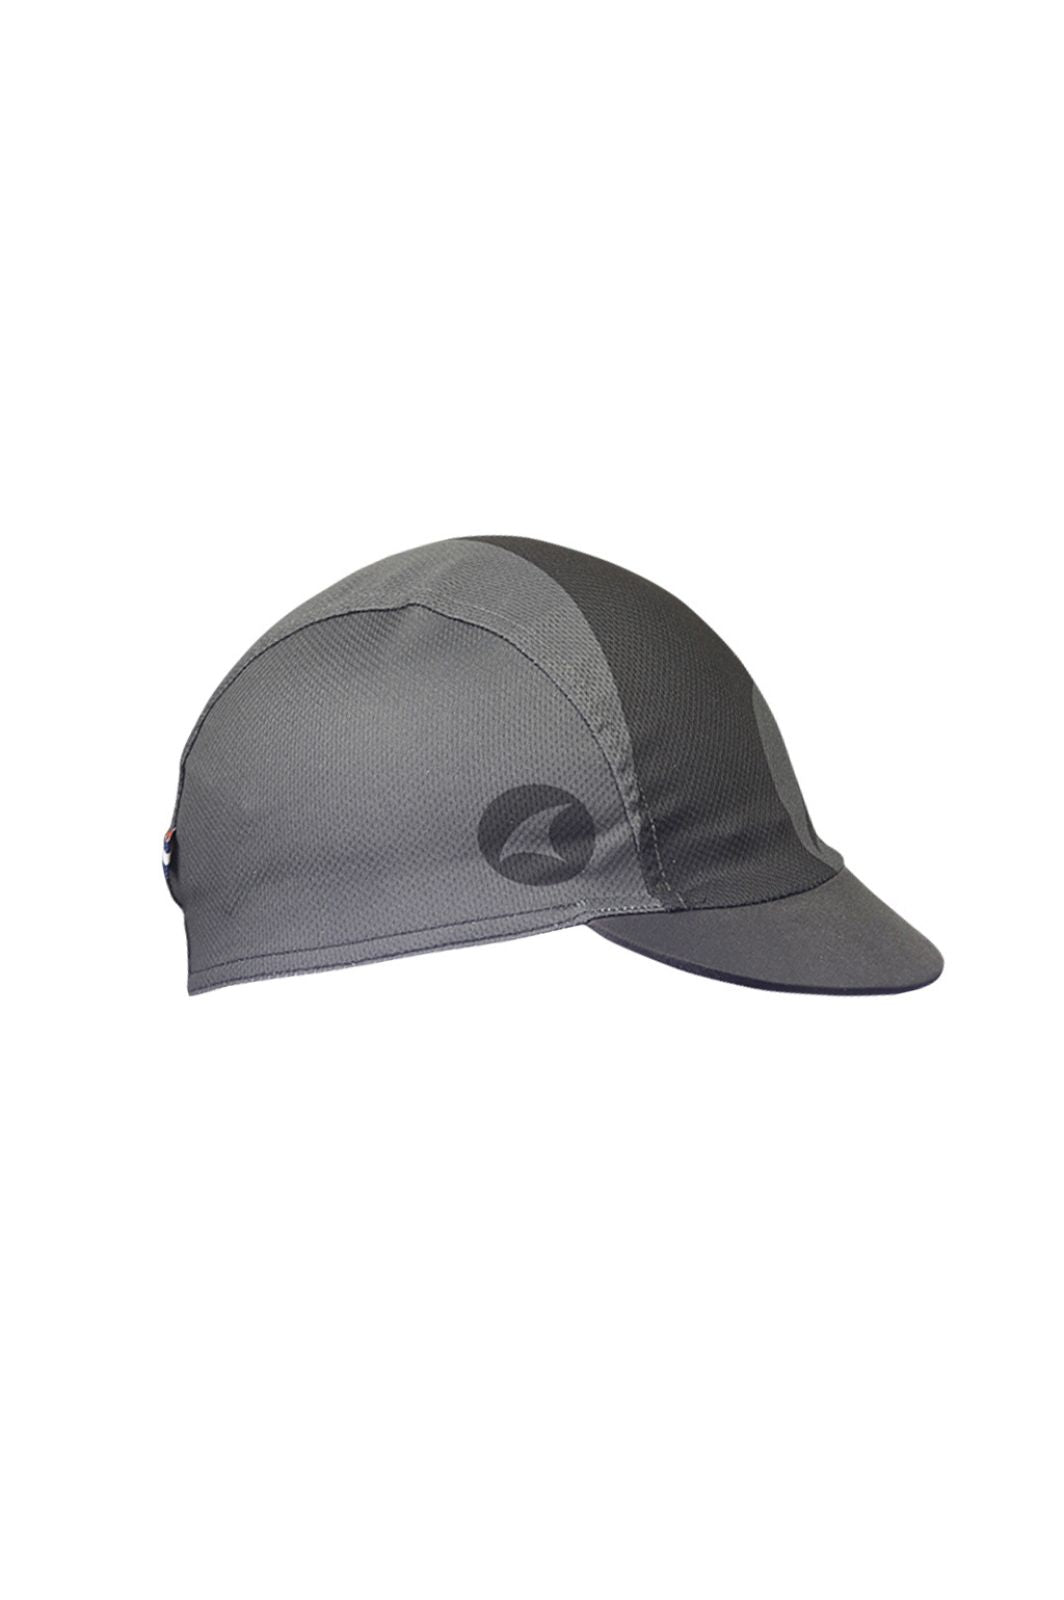 Charcoal Cycling Cap - Right View